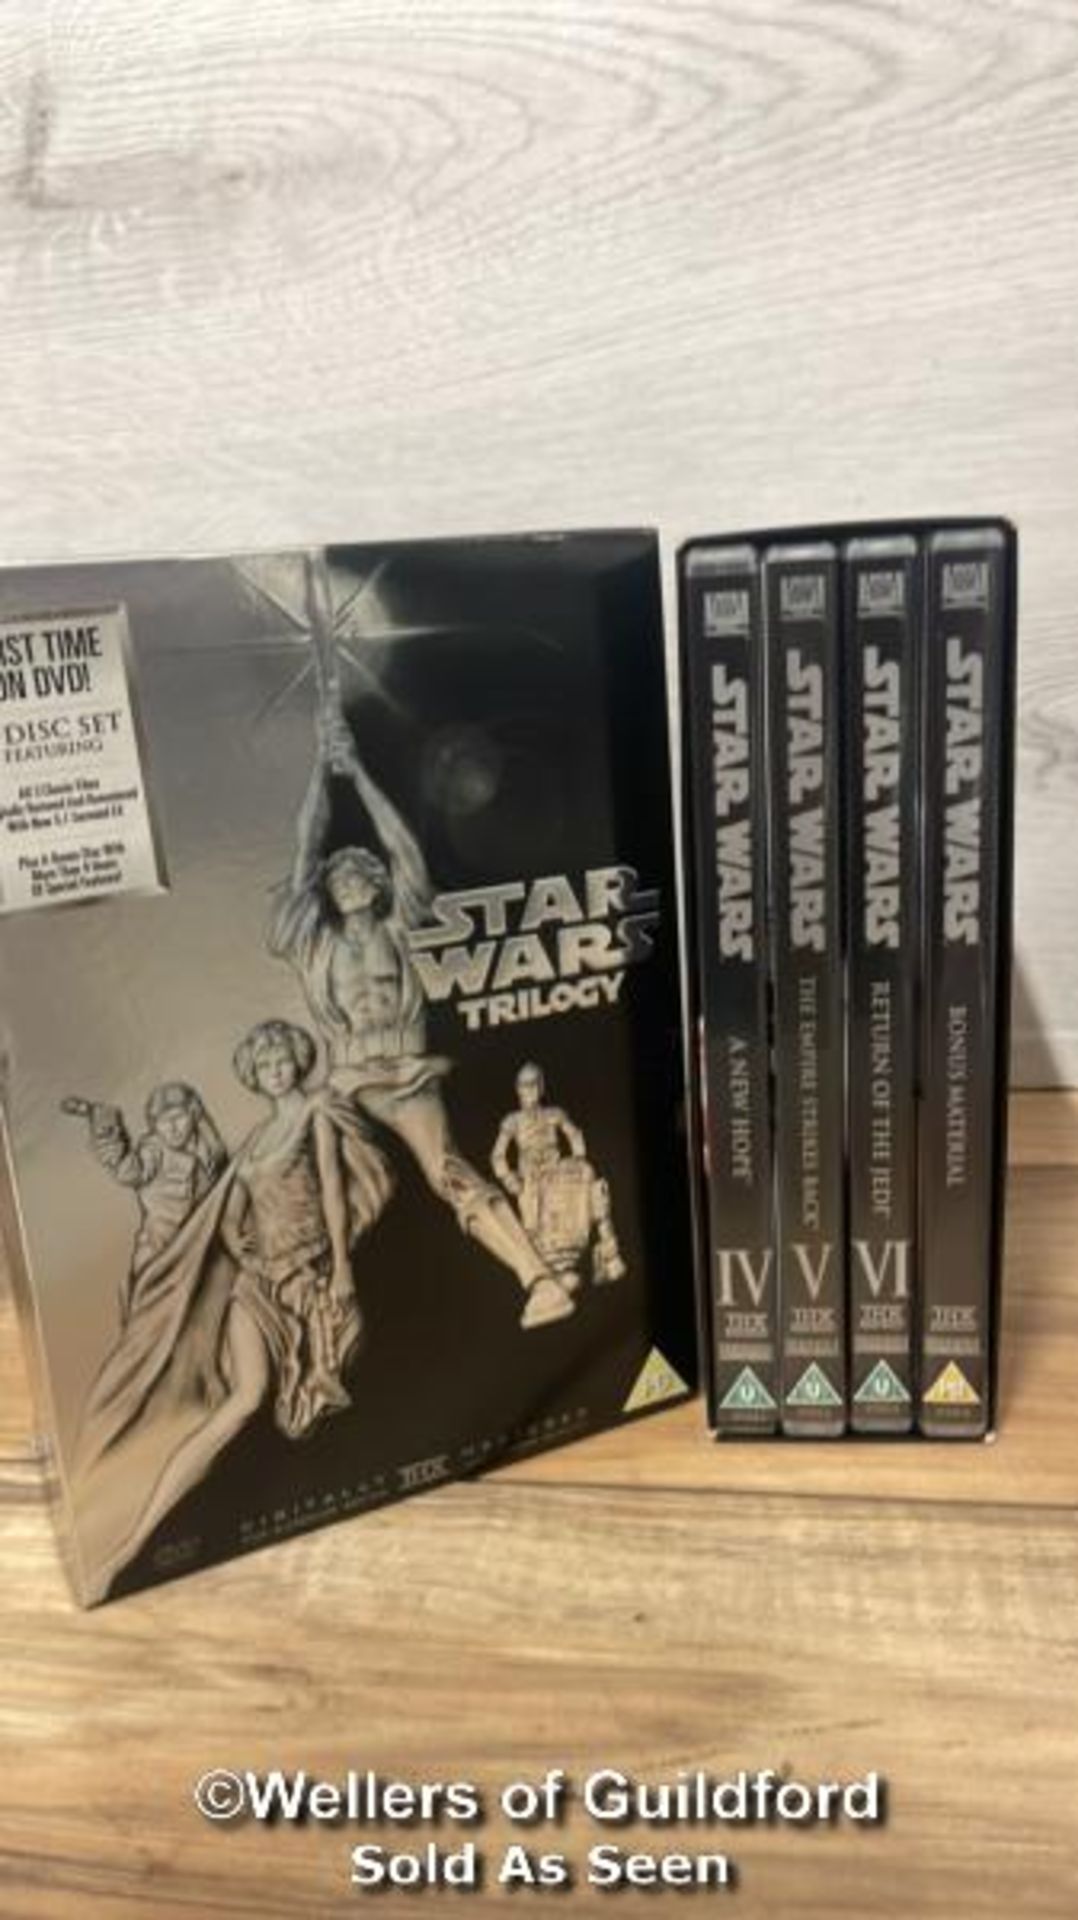 Star Wars DVD's and VHS includiing 1997 Special Edition French edition VHS, original trilogy DVD box - Image 3 of 4